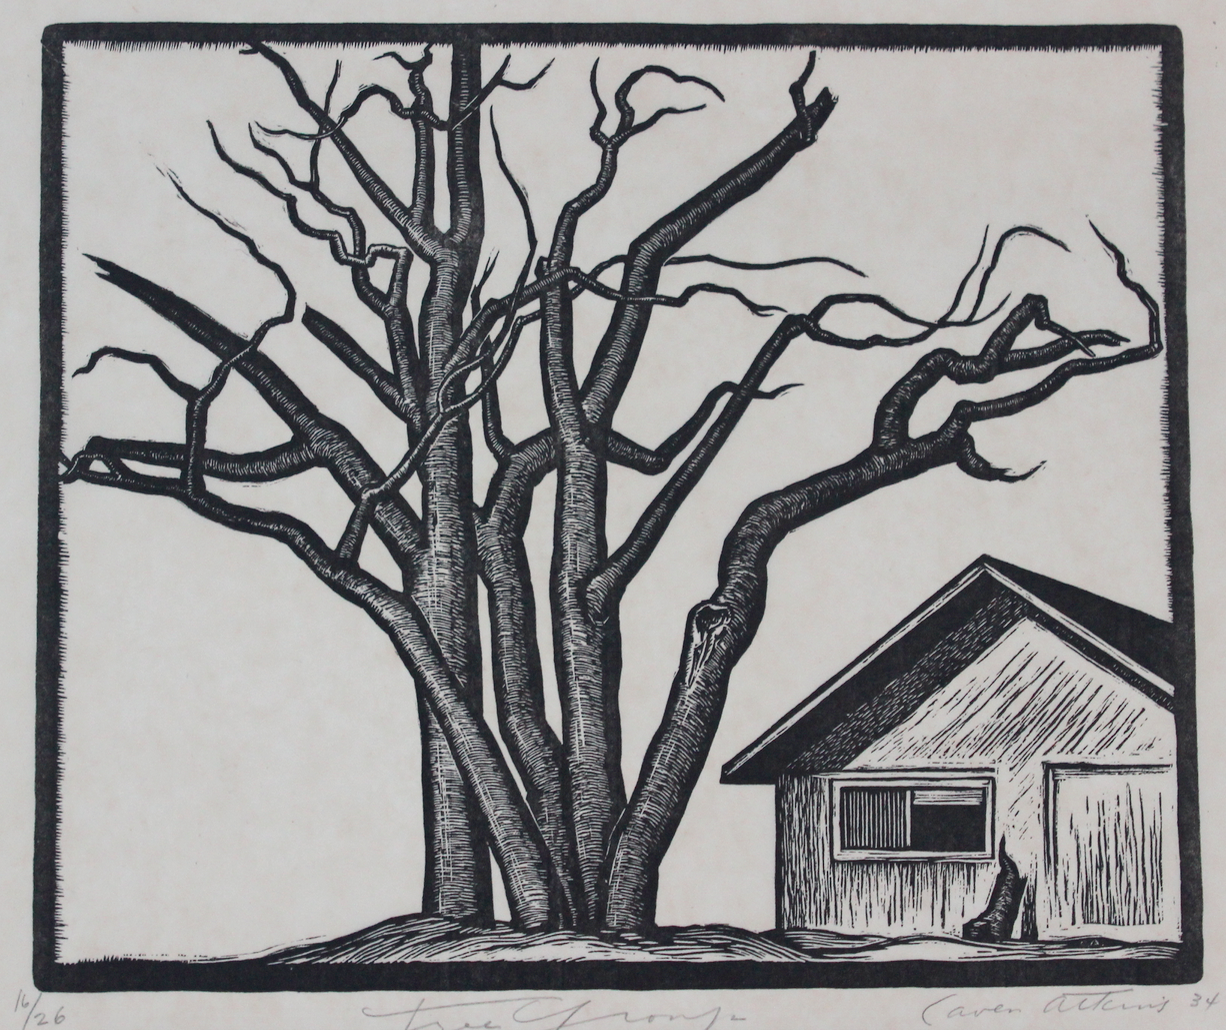 Caven Atkins, Tree Forms, 1934